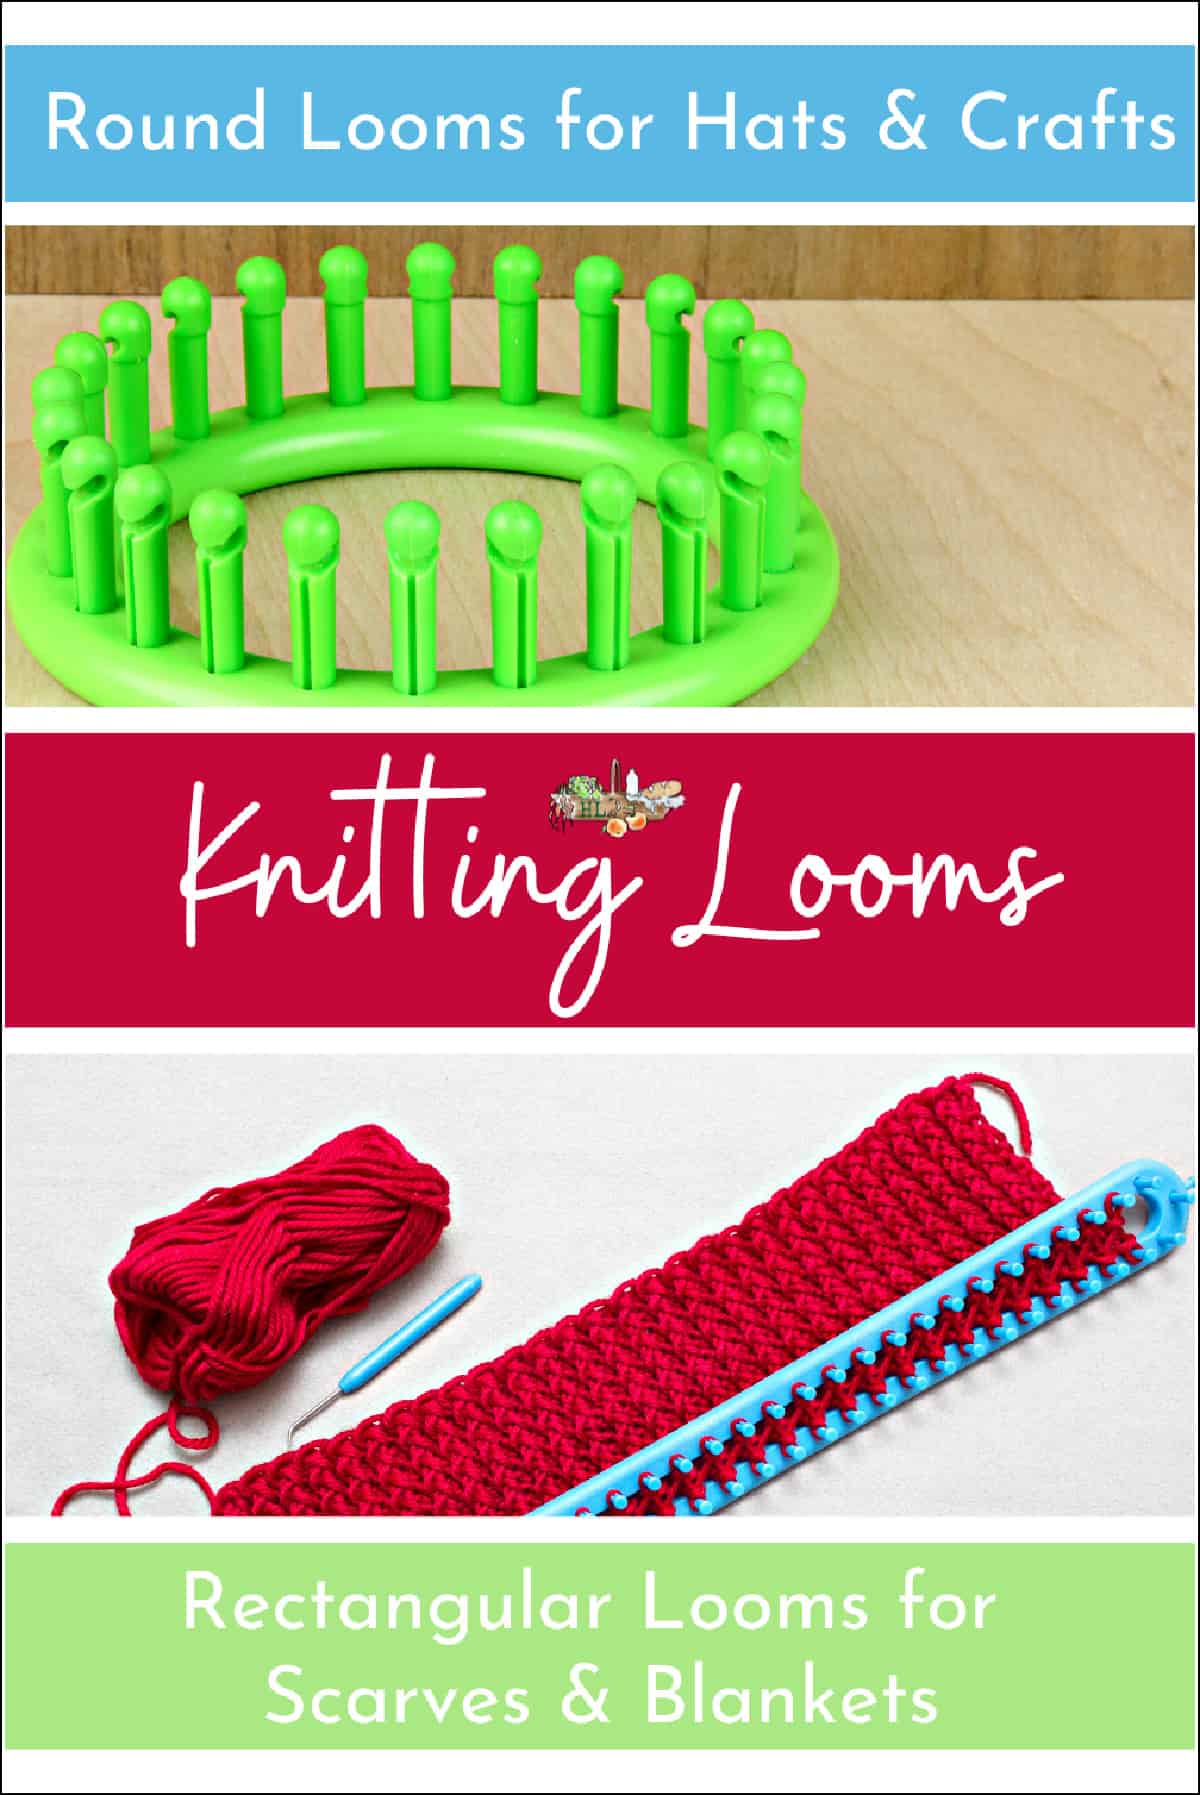 round and rectangular knitting looms with yarn